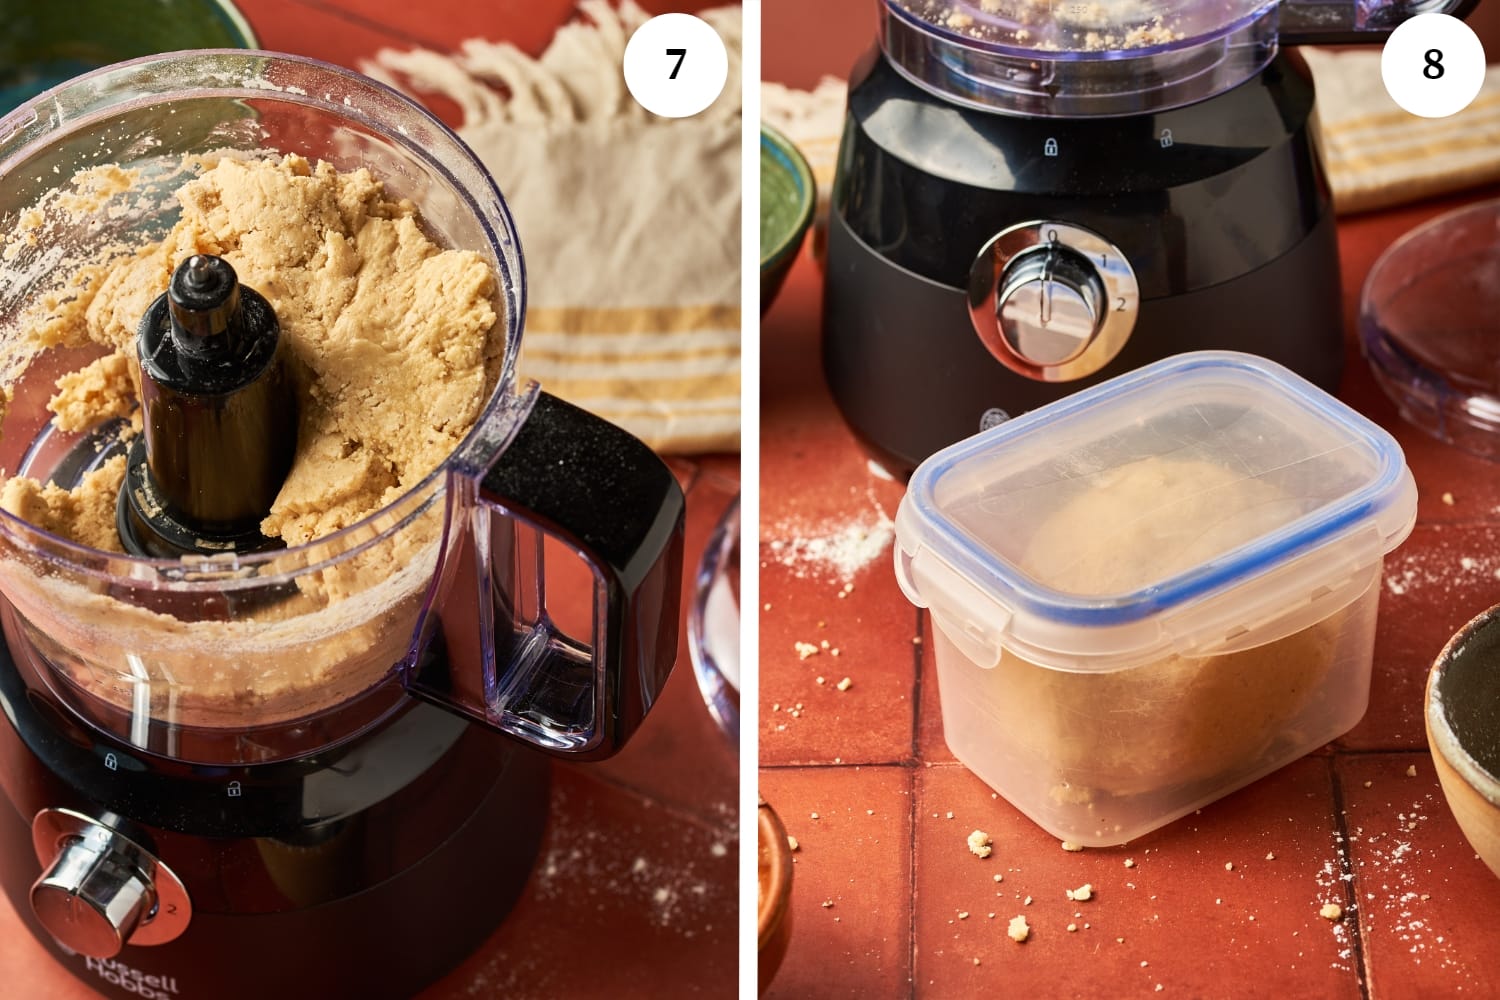 first photo is a sticky dough inside a food processor. second photo is a dough rolled into a ball inside a closed container beside a food processor.